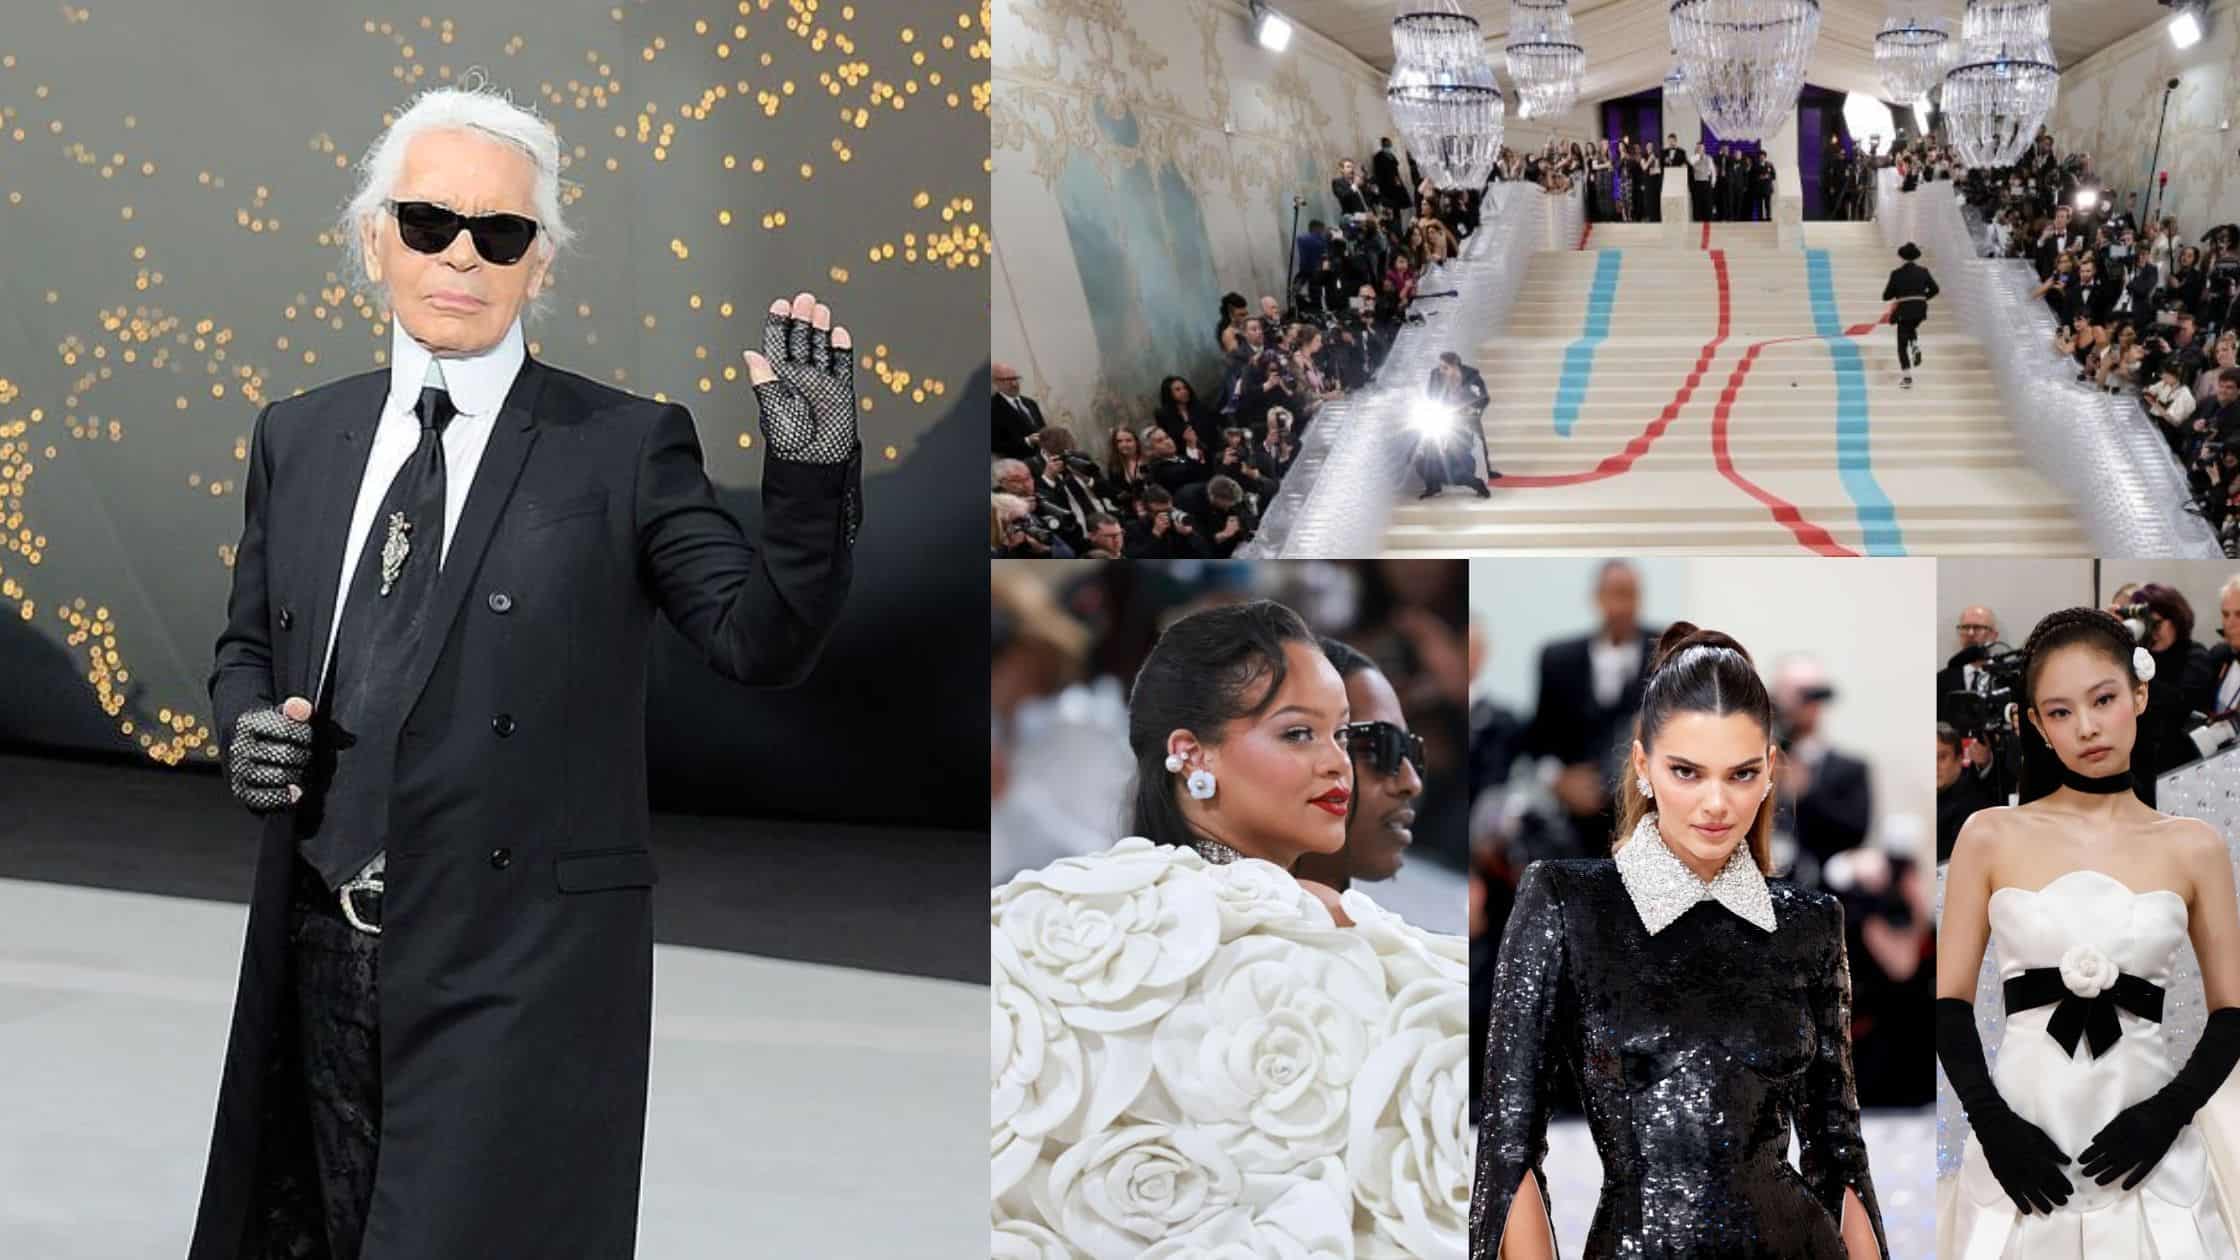 Karl Lagerfeld diet book controversy at Met gala